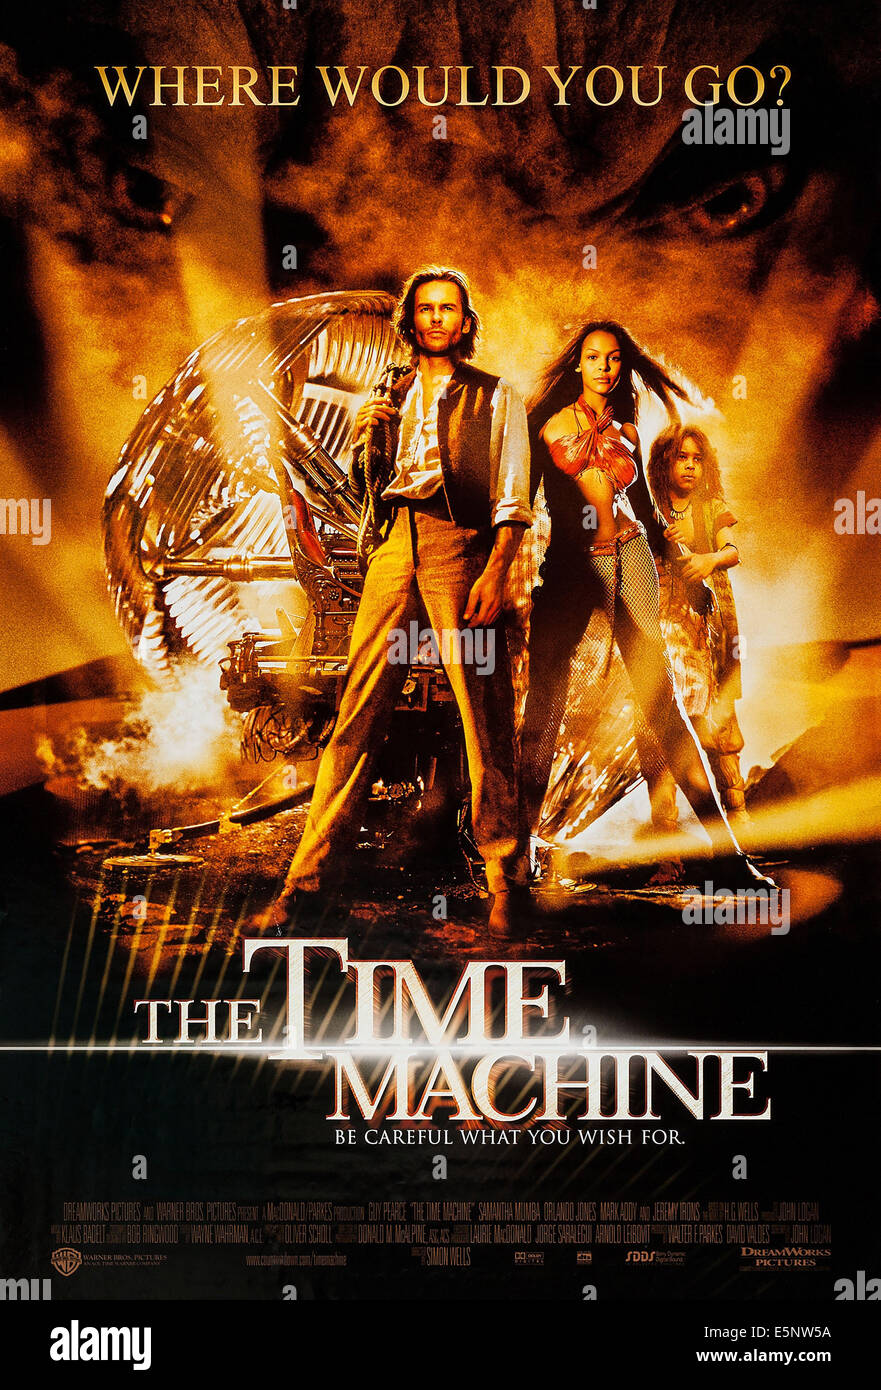 THE TIME MACHINE, US poster art, Guy Pearce (center), 2002. ©DreamWorks Distribution/courtesy Everett Collection Stock Photo